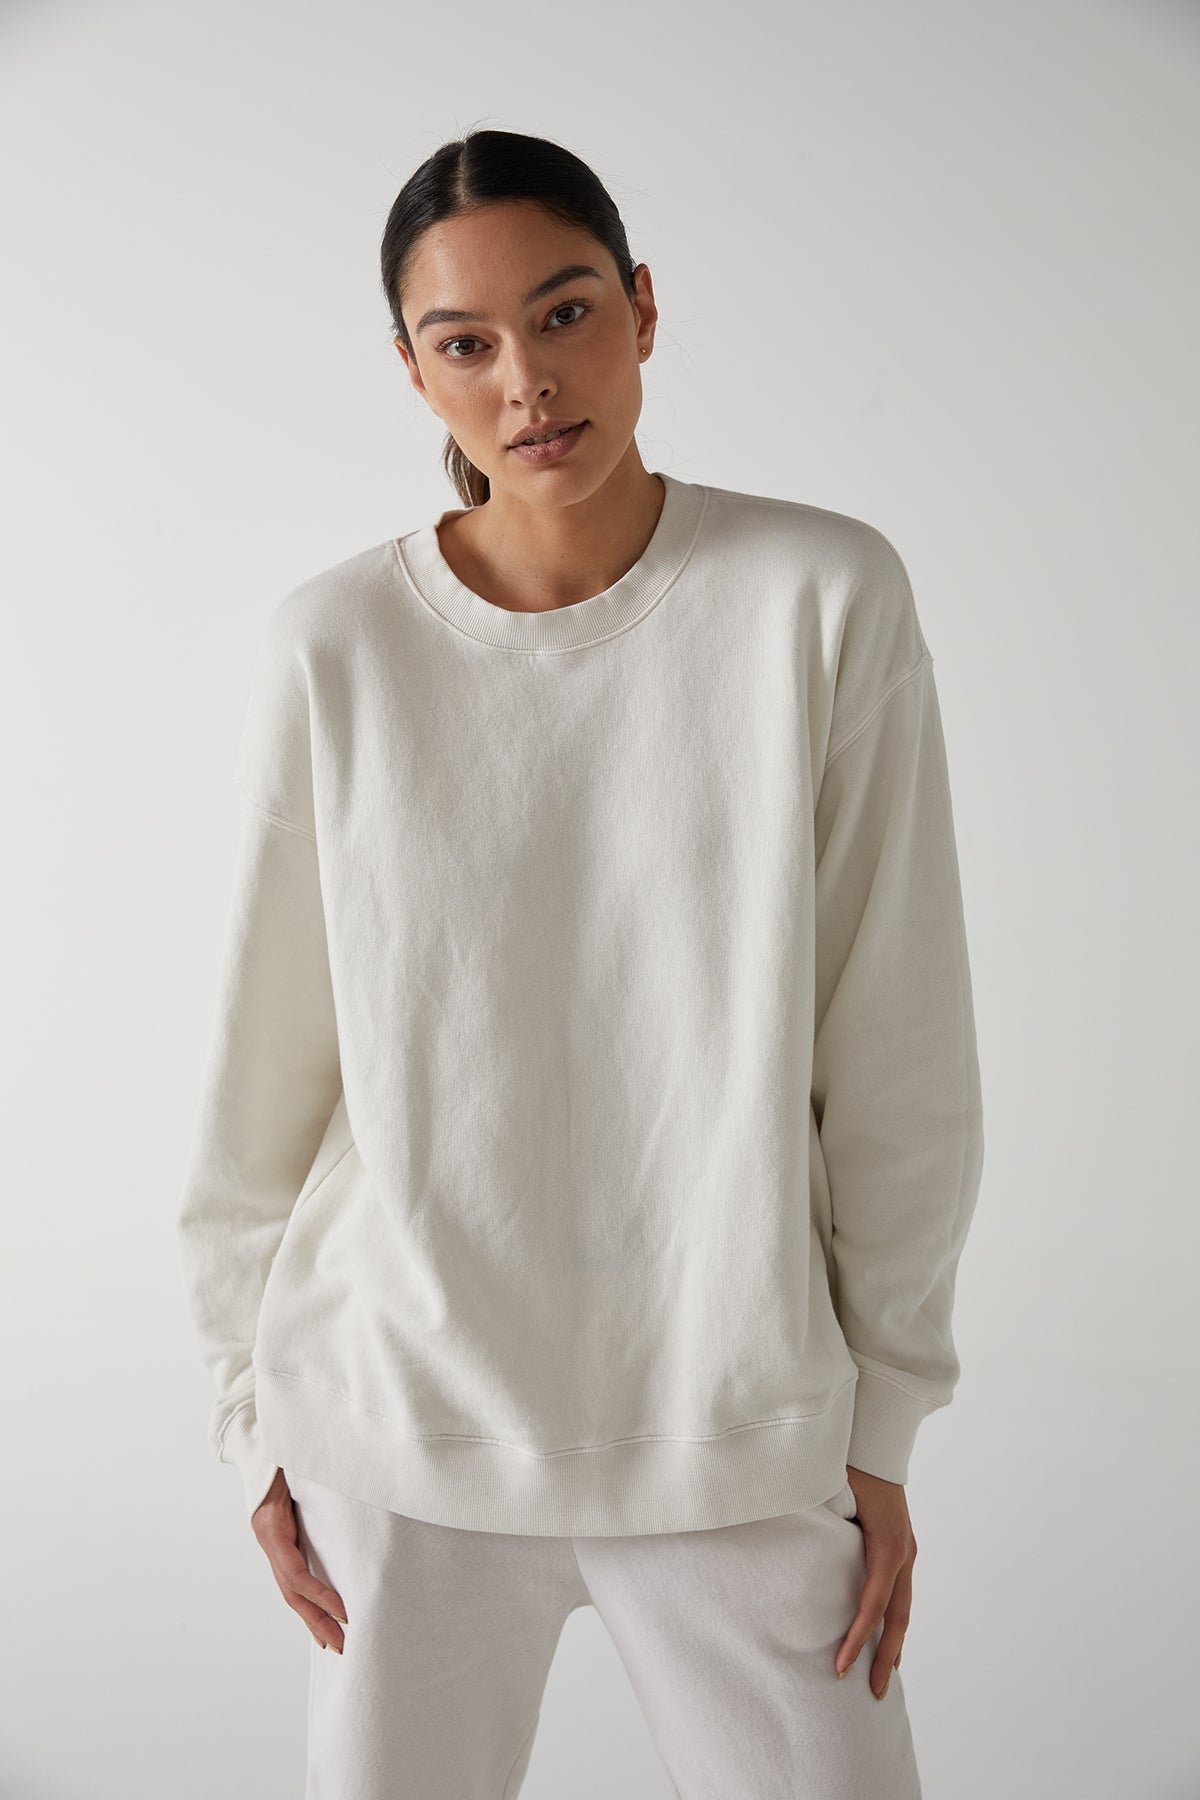 The model is wearing a slouchy white Abbot sweatshirt and sweatpants made from organic cotton by Velvet by Jenny Graham.-25483446026433